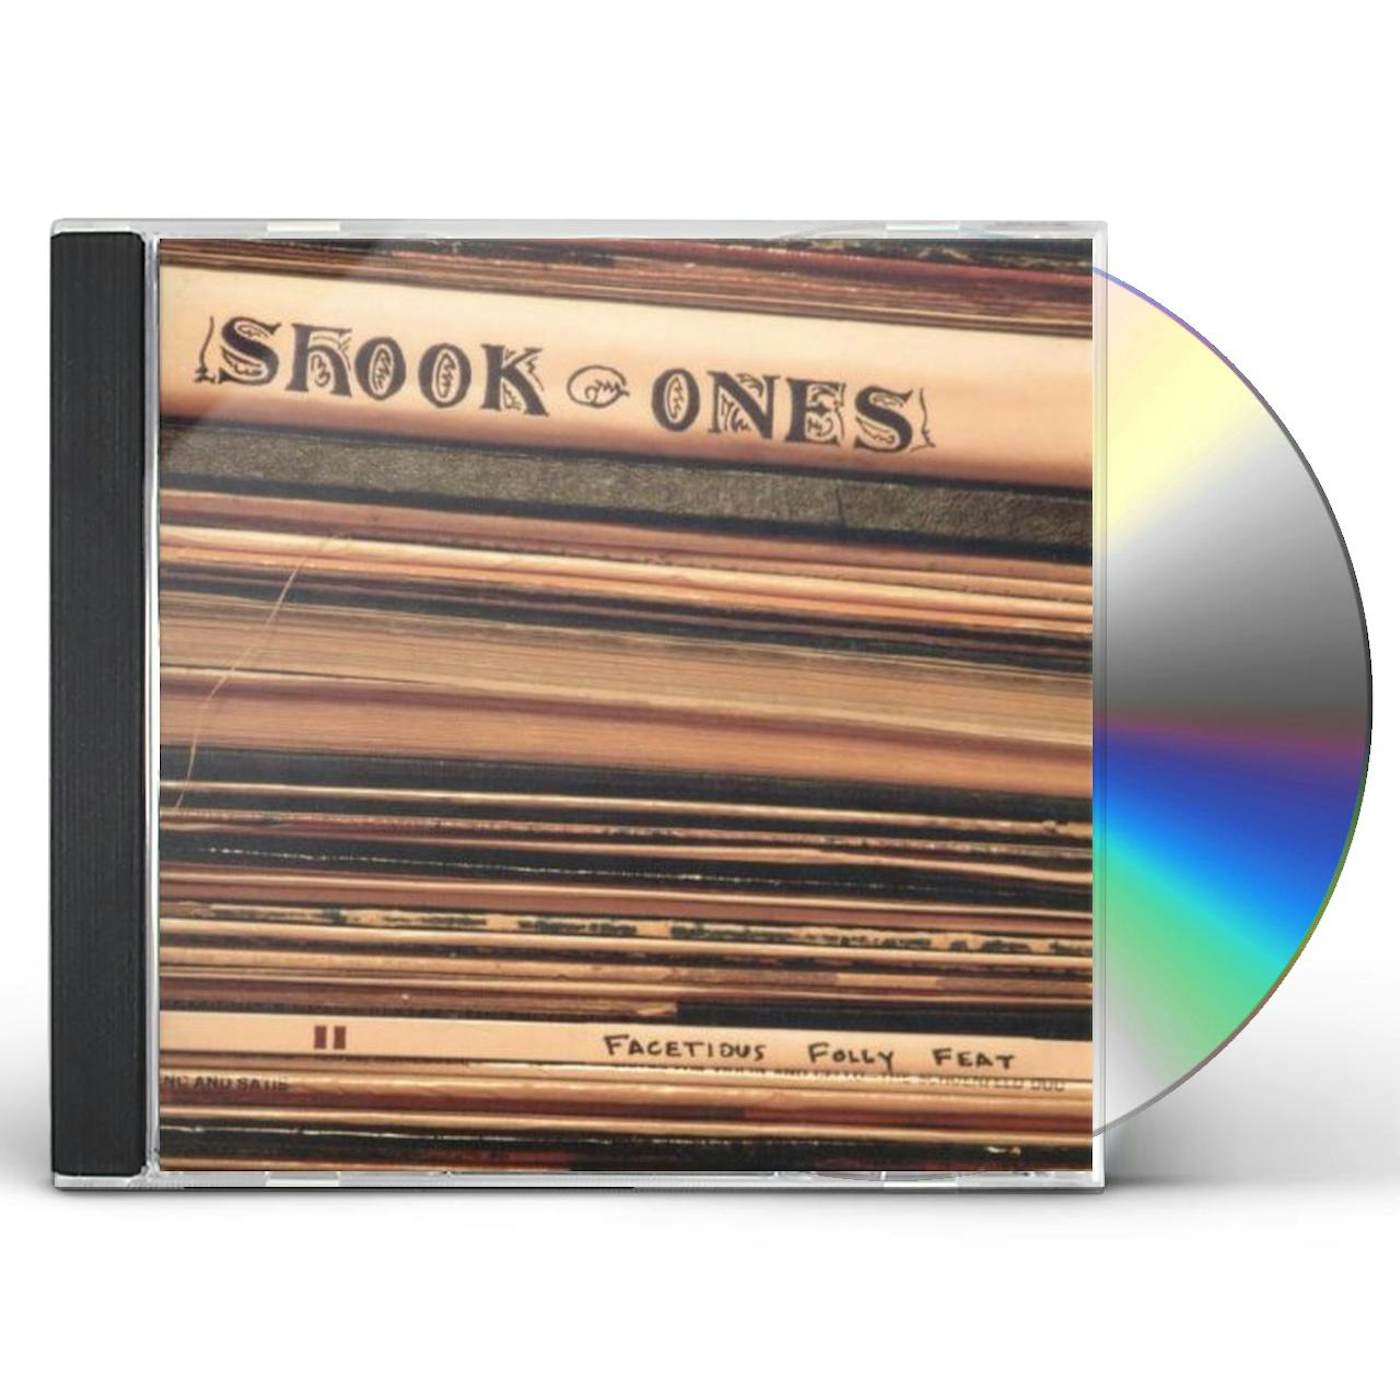 Shook Ones FACETIOUS FOLLY FEAT CD